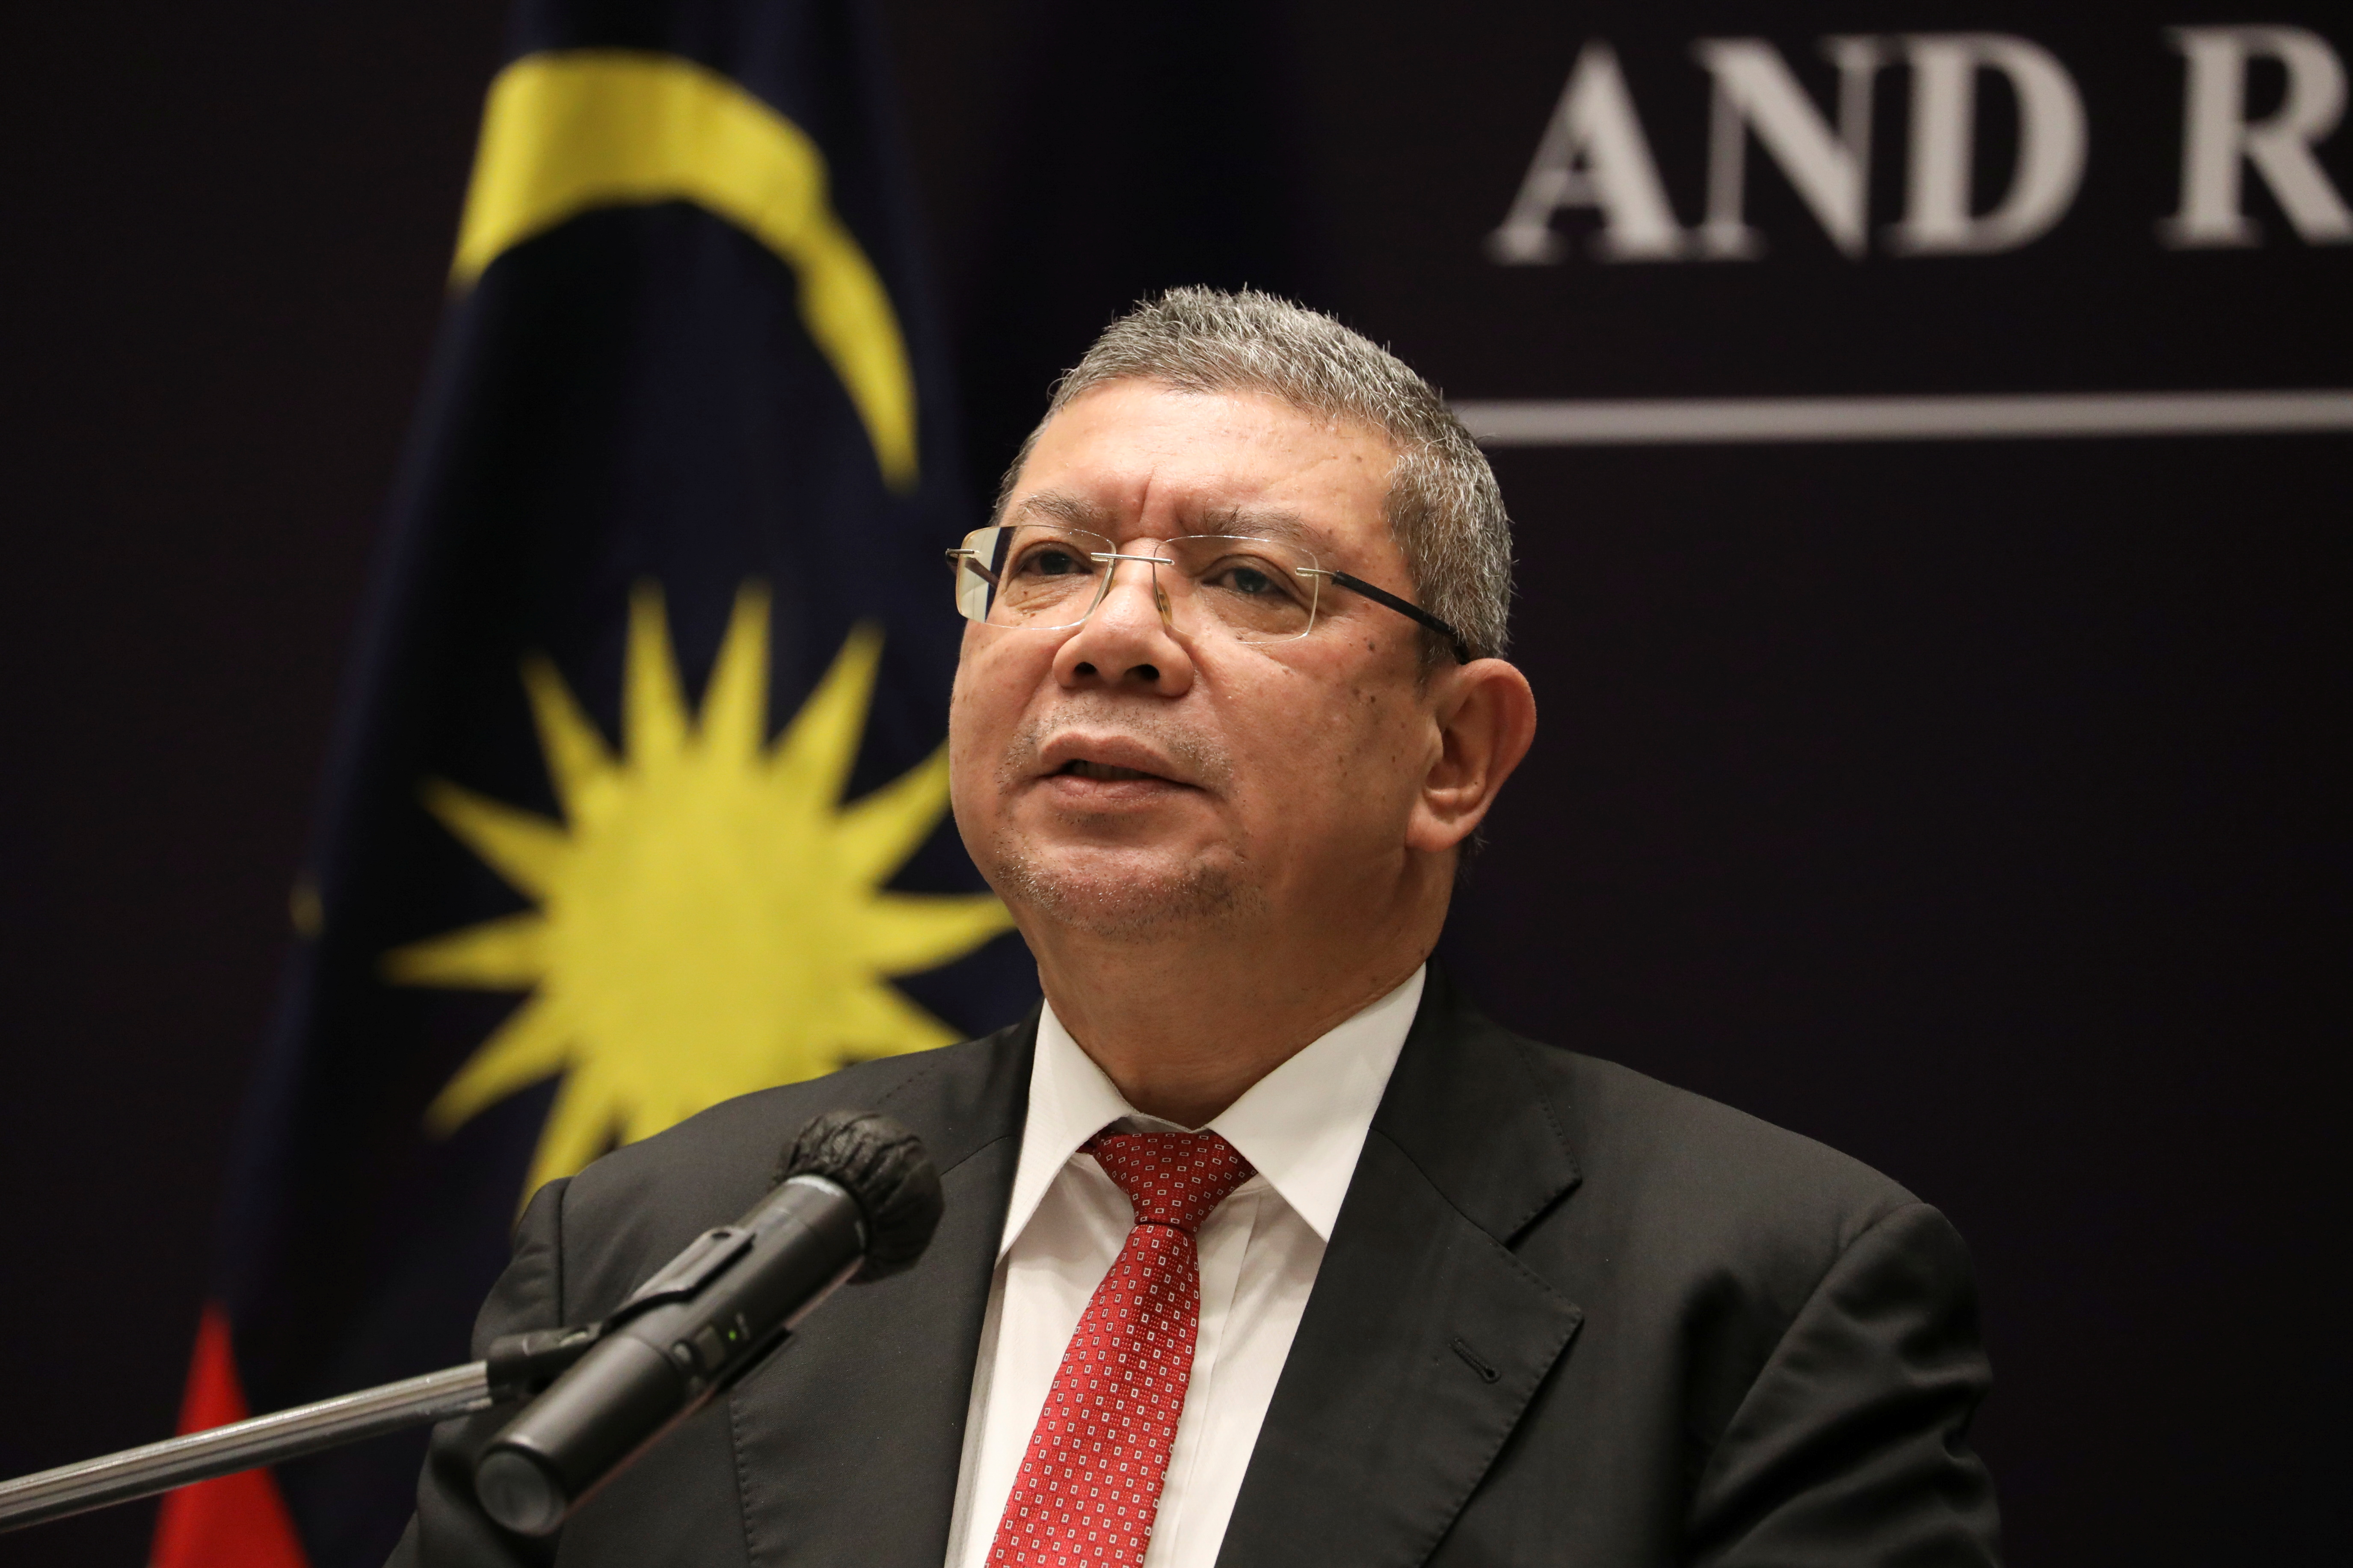 Malaysia's Foreign Minister Saifuddin Abdullah speaks during a news conference after ASEAN Summit in Kuala Lumpur